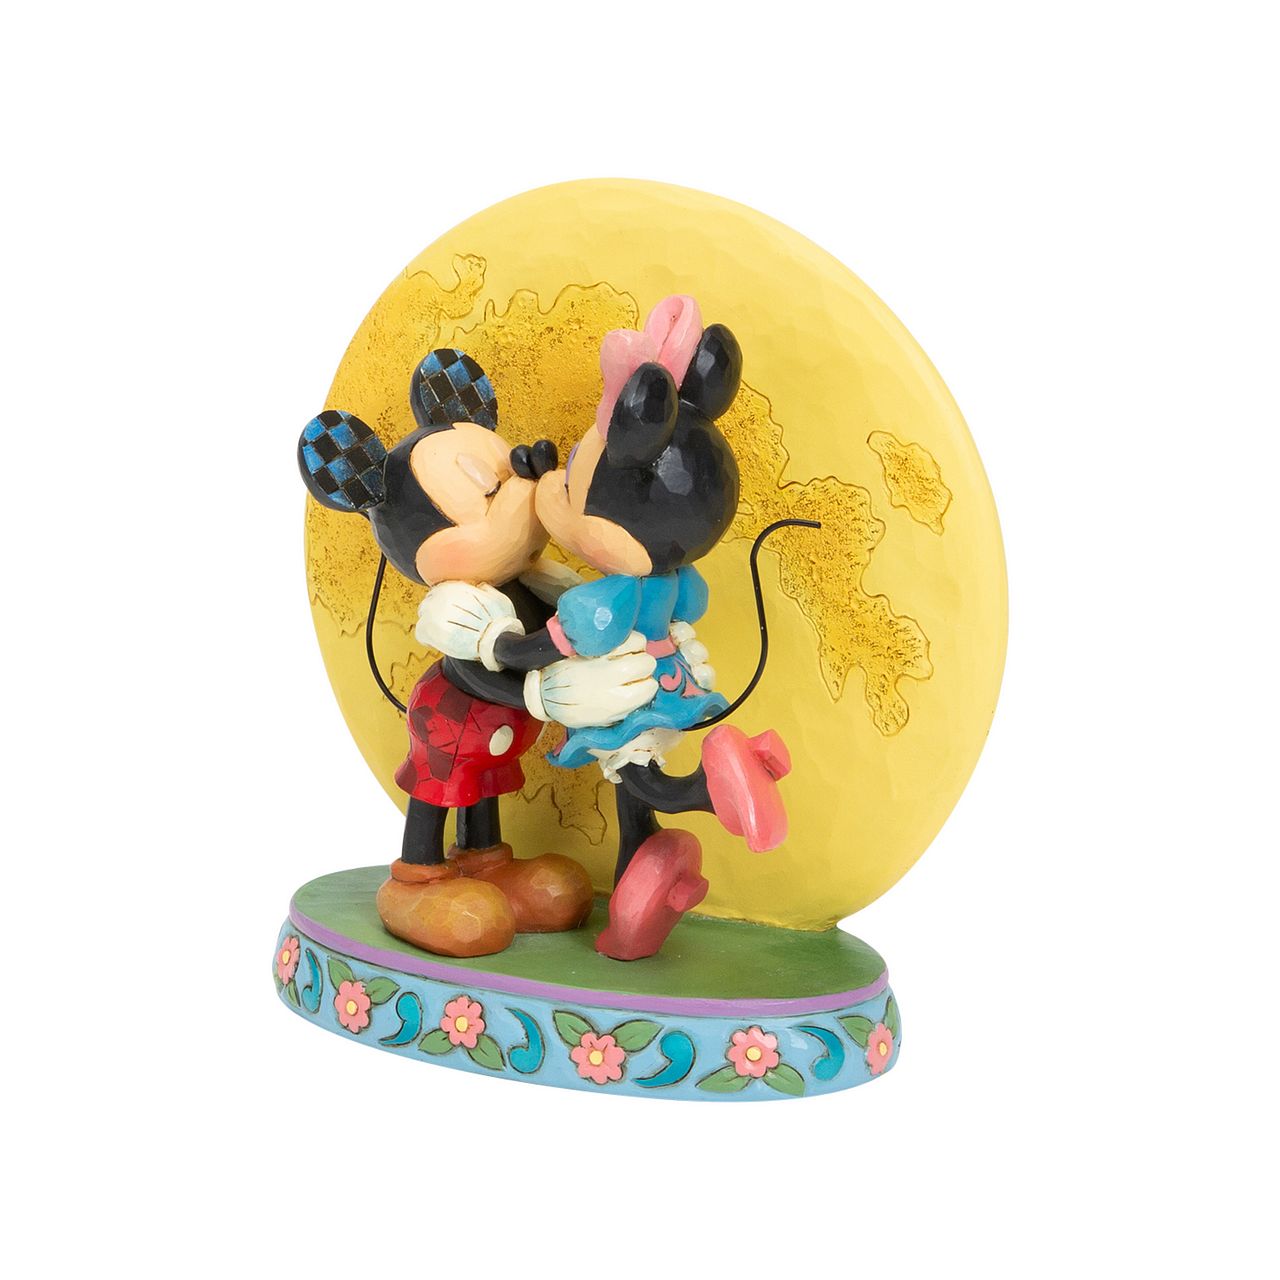 Jim Shore Magic and Moonlight Mickey and Minnie with Moon Figurine  This delightful figurine portrays Mickey & his sweetheart Minnie dancing in the moonlight. This refreshing piece celebrates springtime romance and is sure to be a hit with collectors.